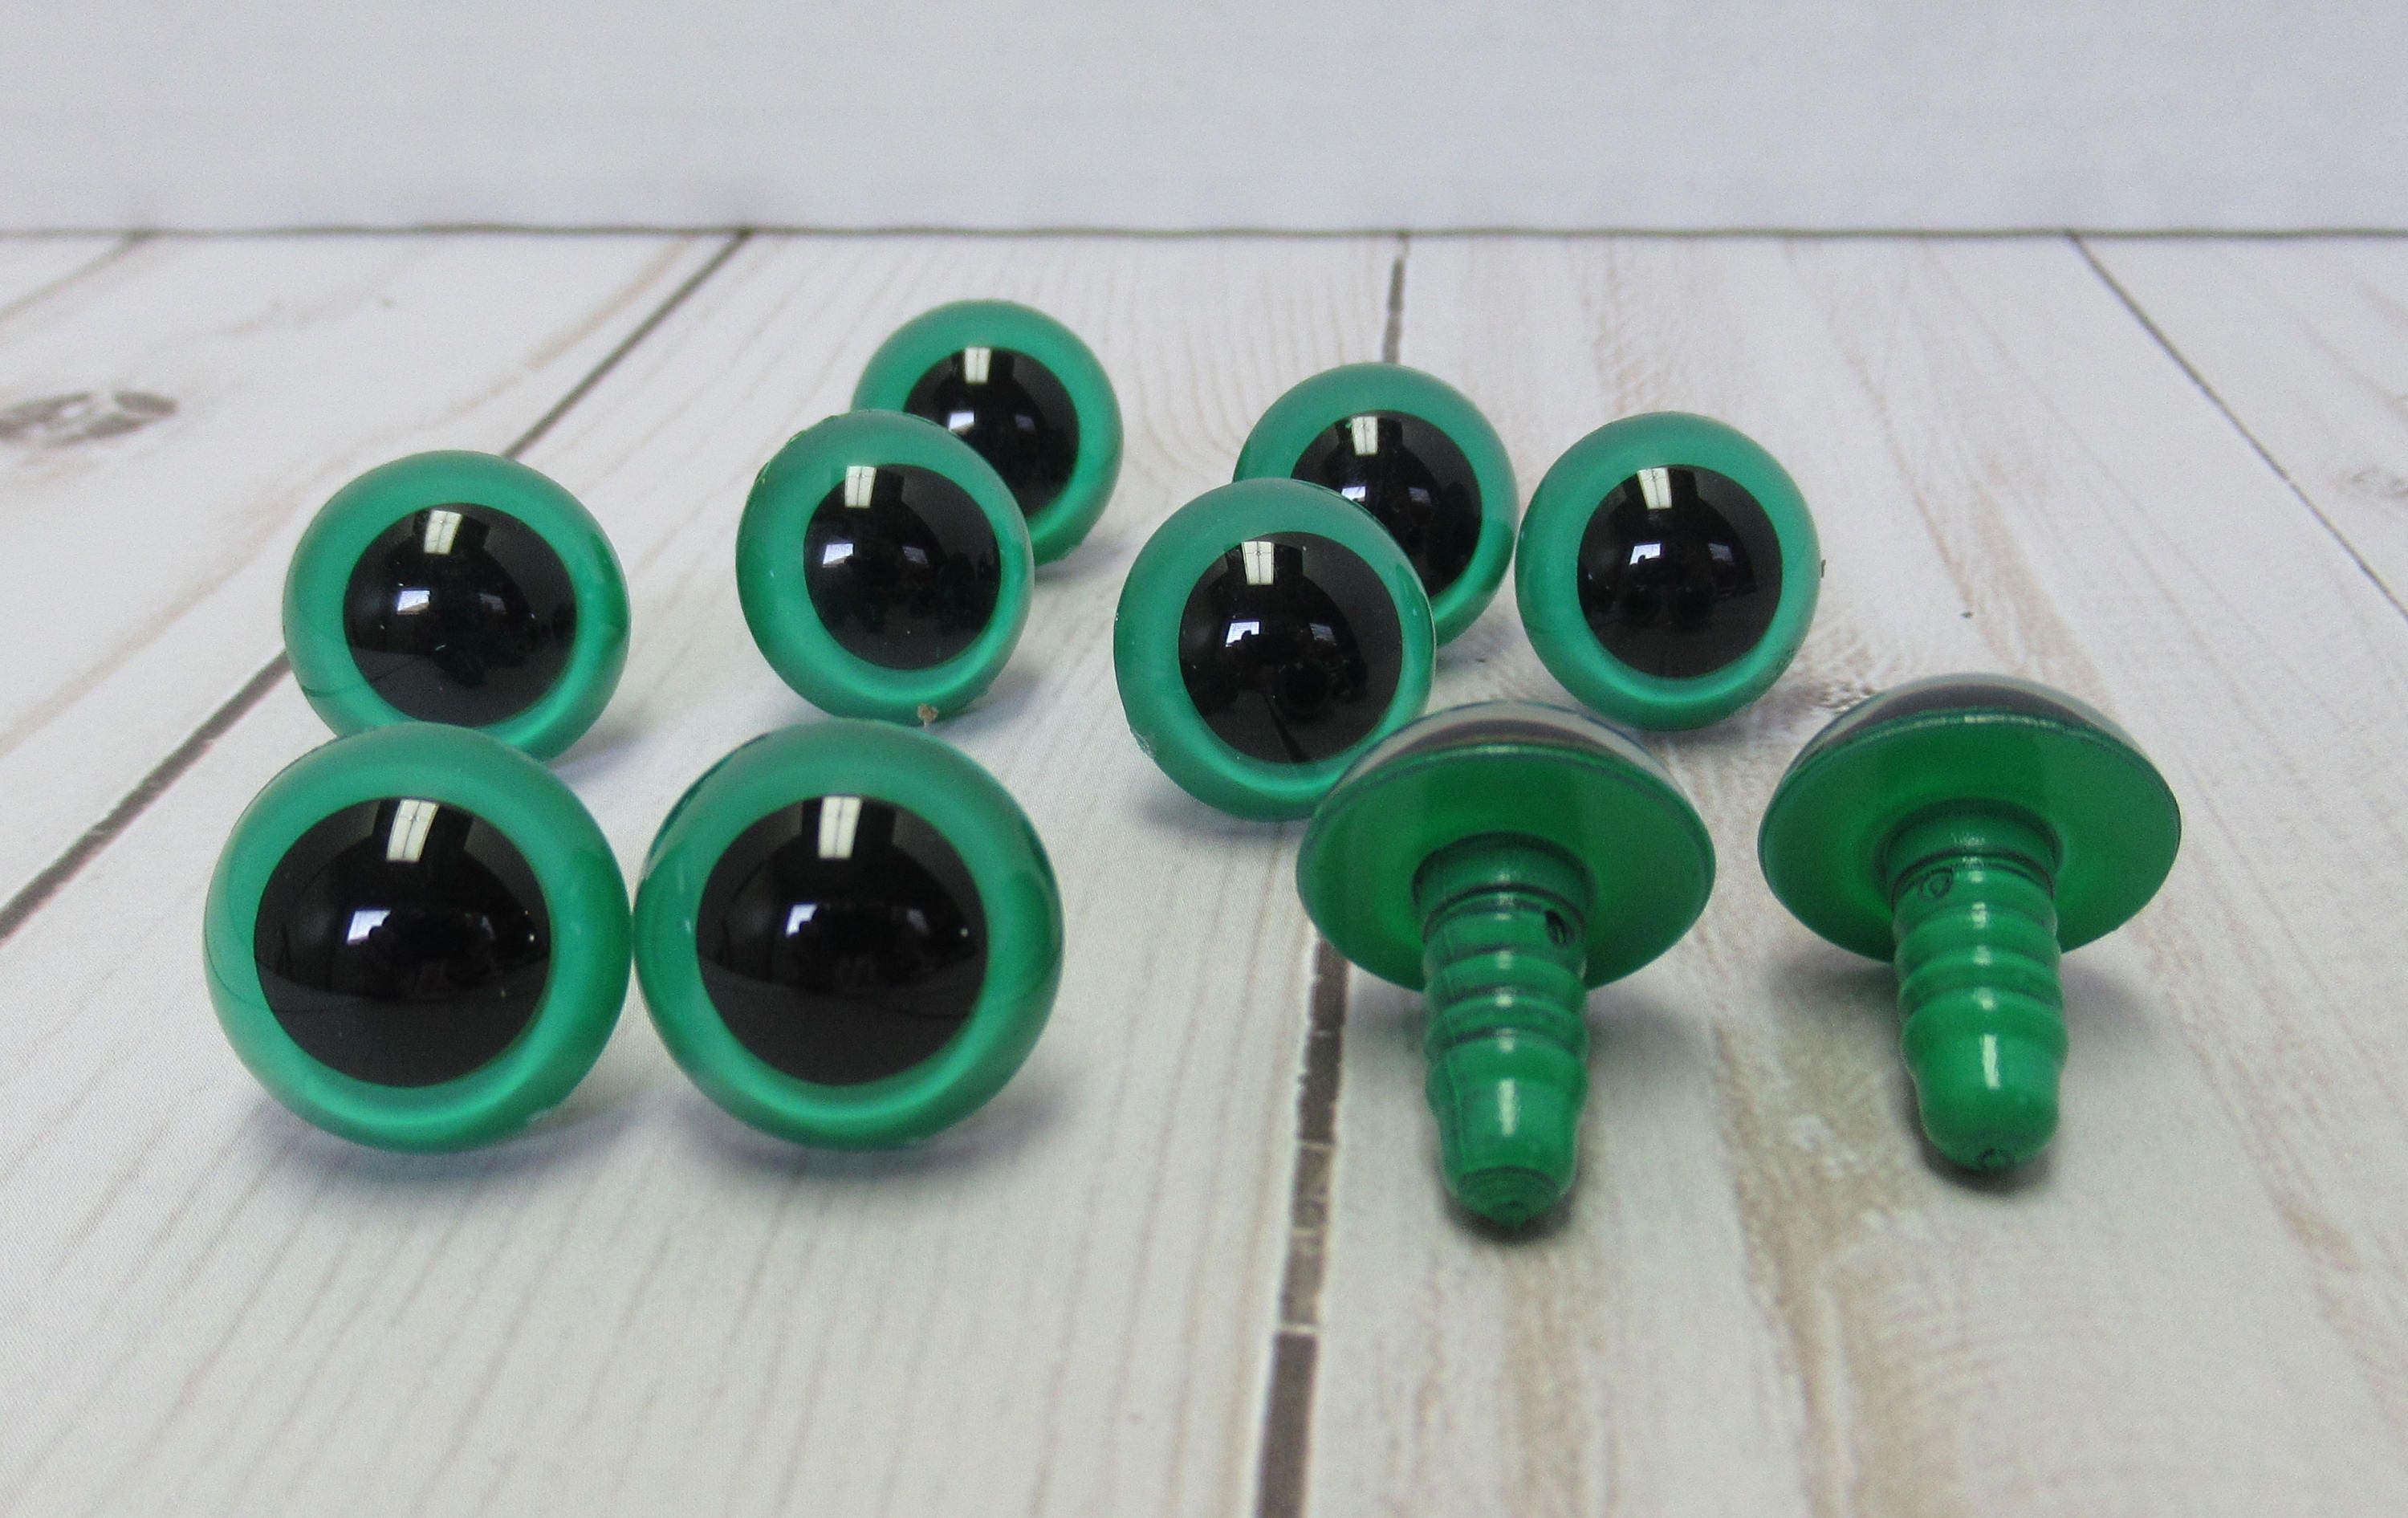 Safety Eyes Transparent Green (2 pieces) 